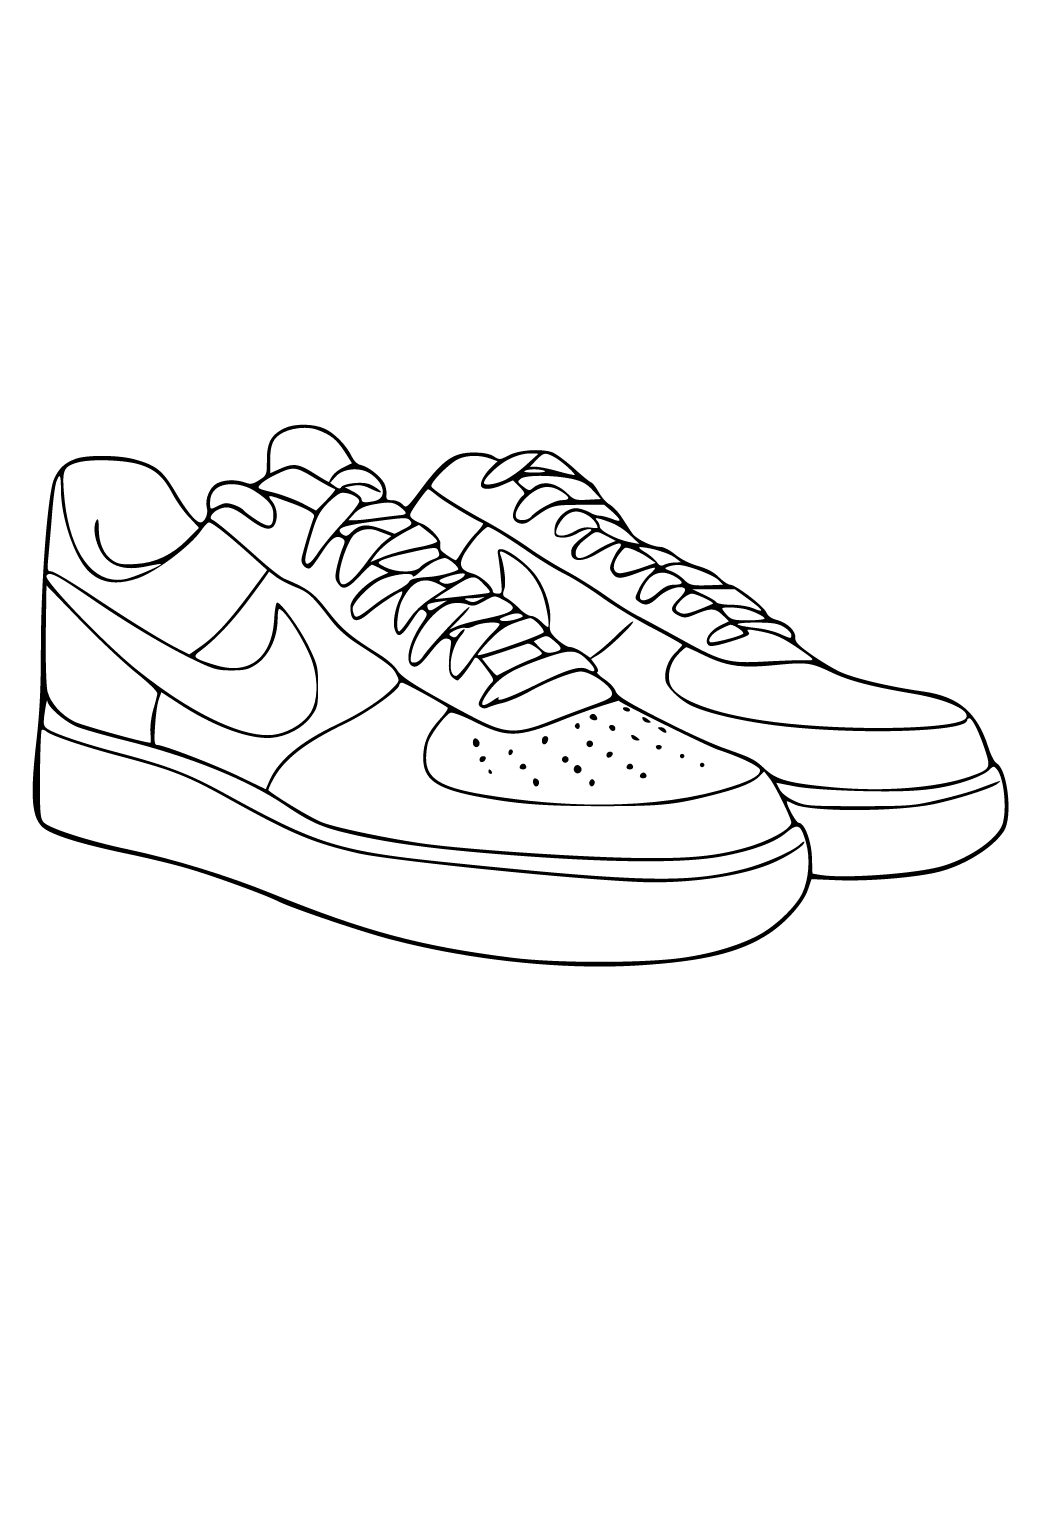 Free printable nike logo coloring page sheet and picture for adults and kids girls and boys